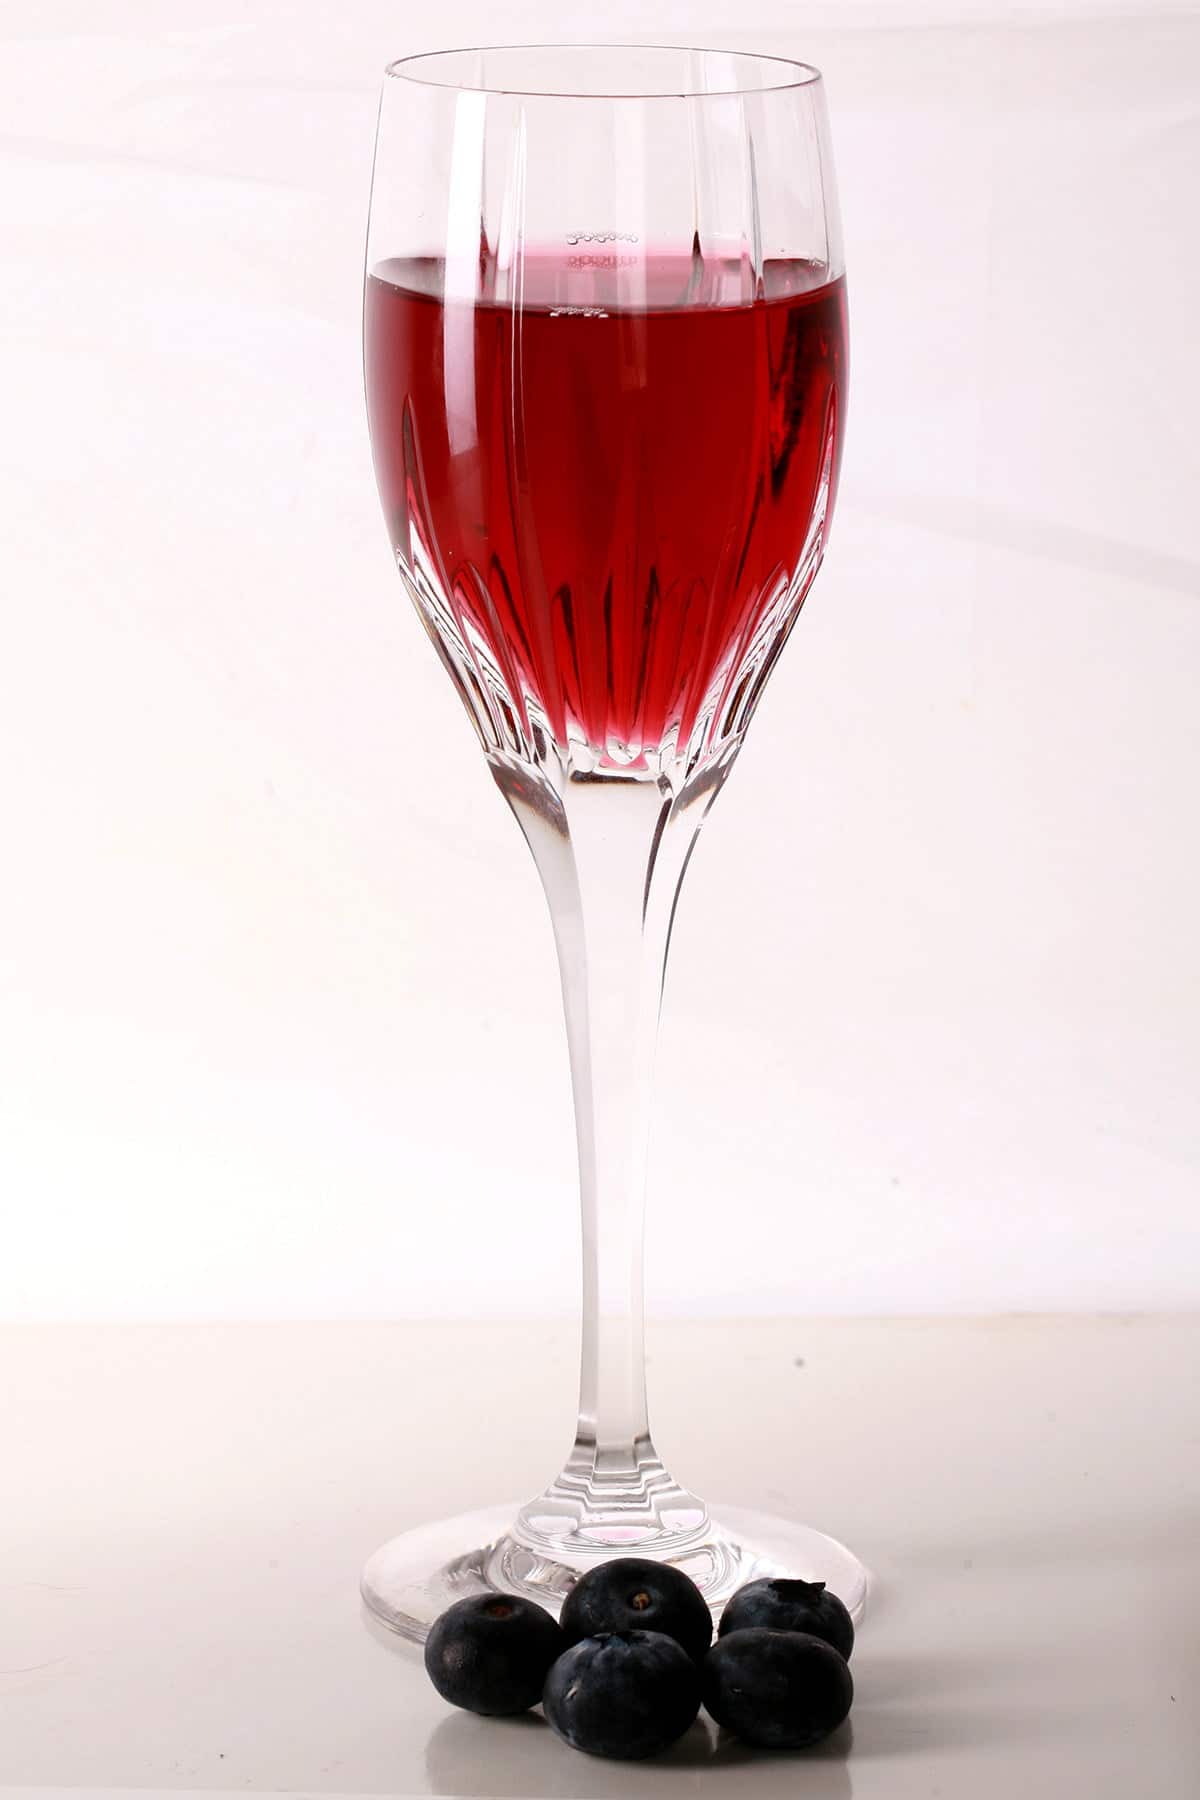 A faceted wine glass full of blueberry mead, with fresh blueberries at the base of the glass.